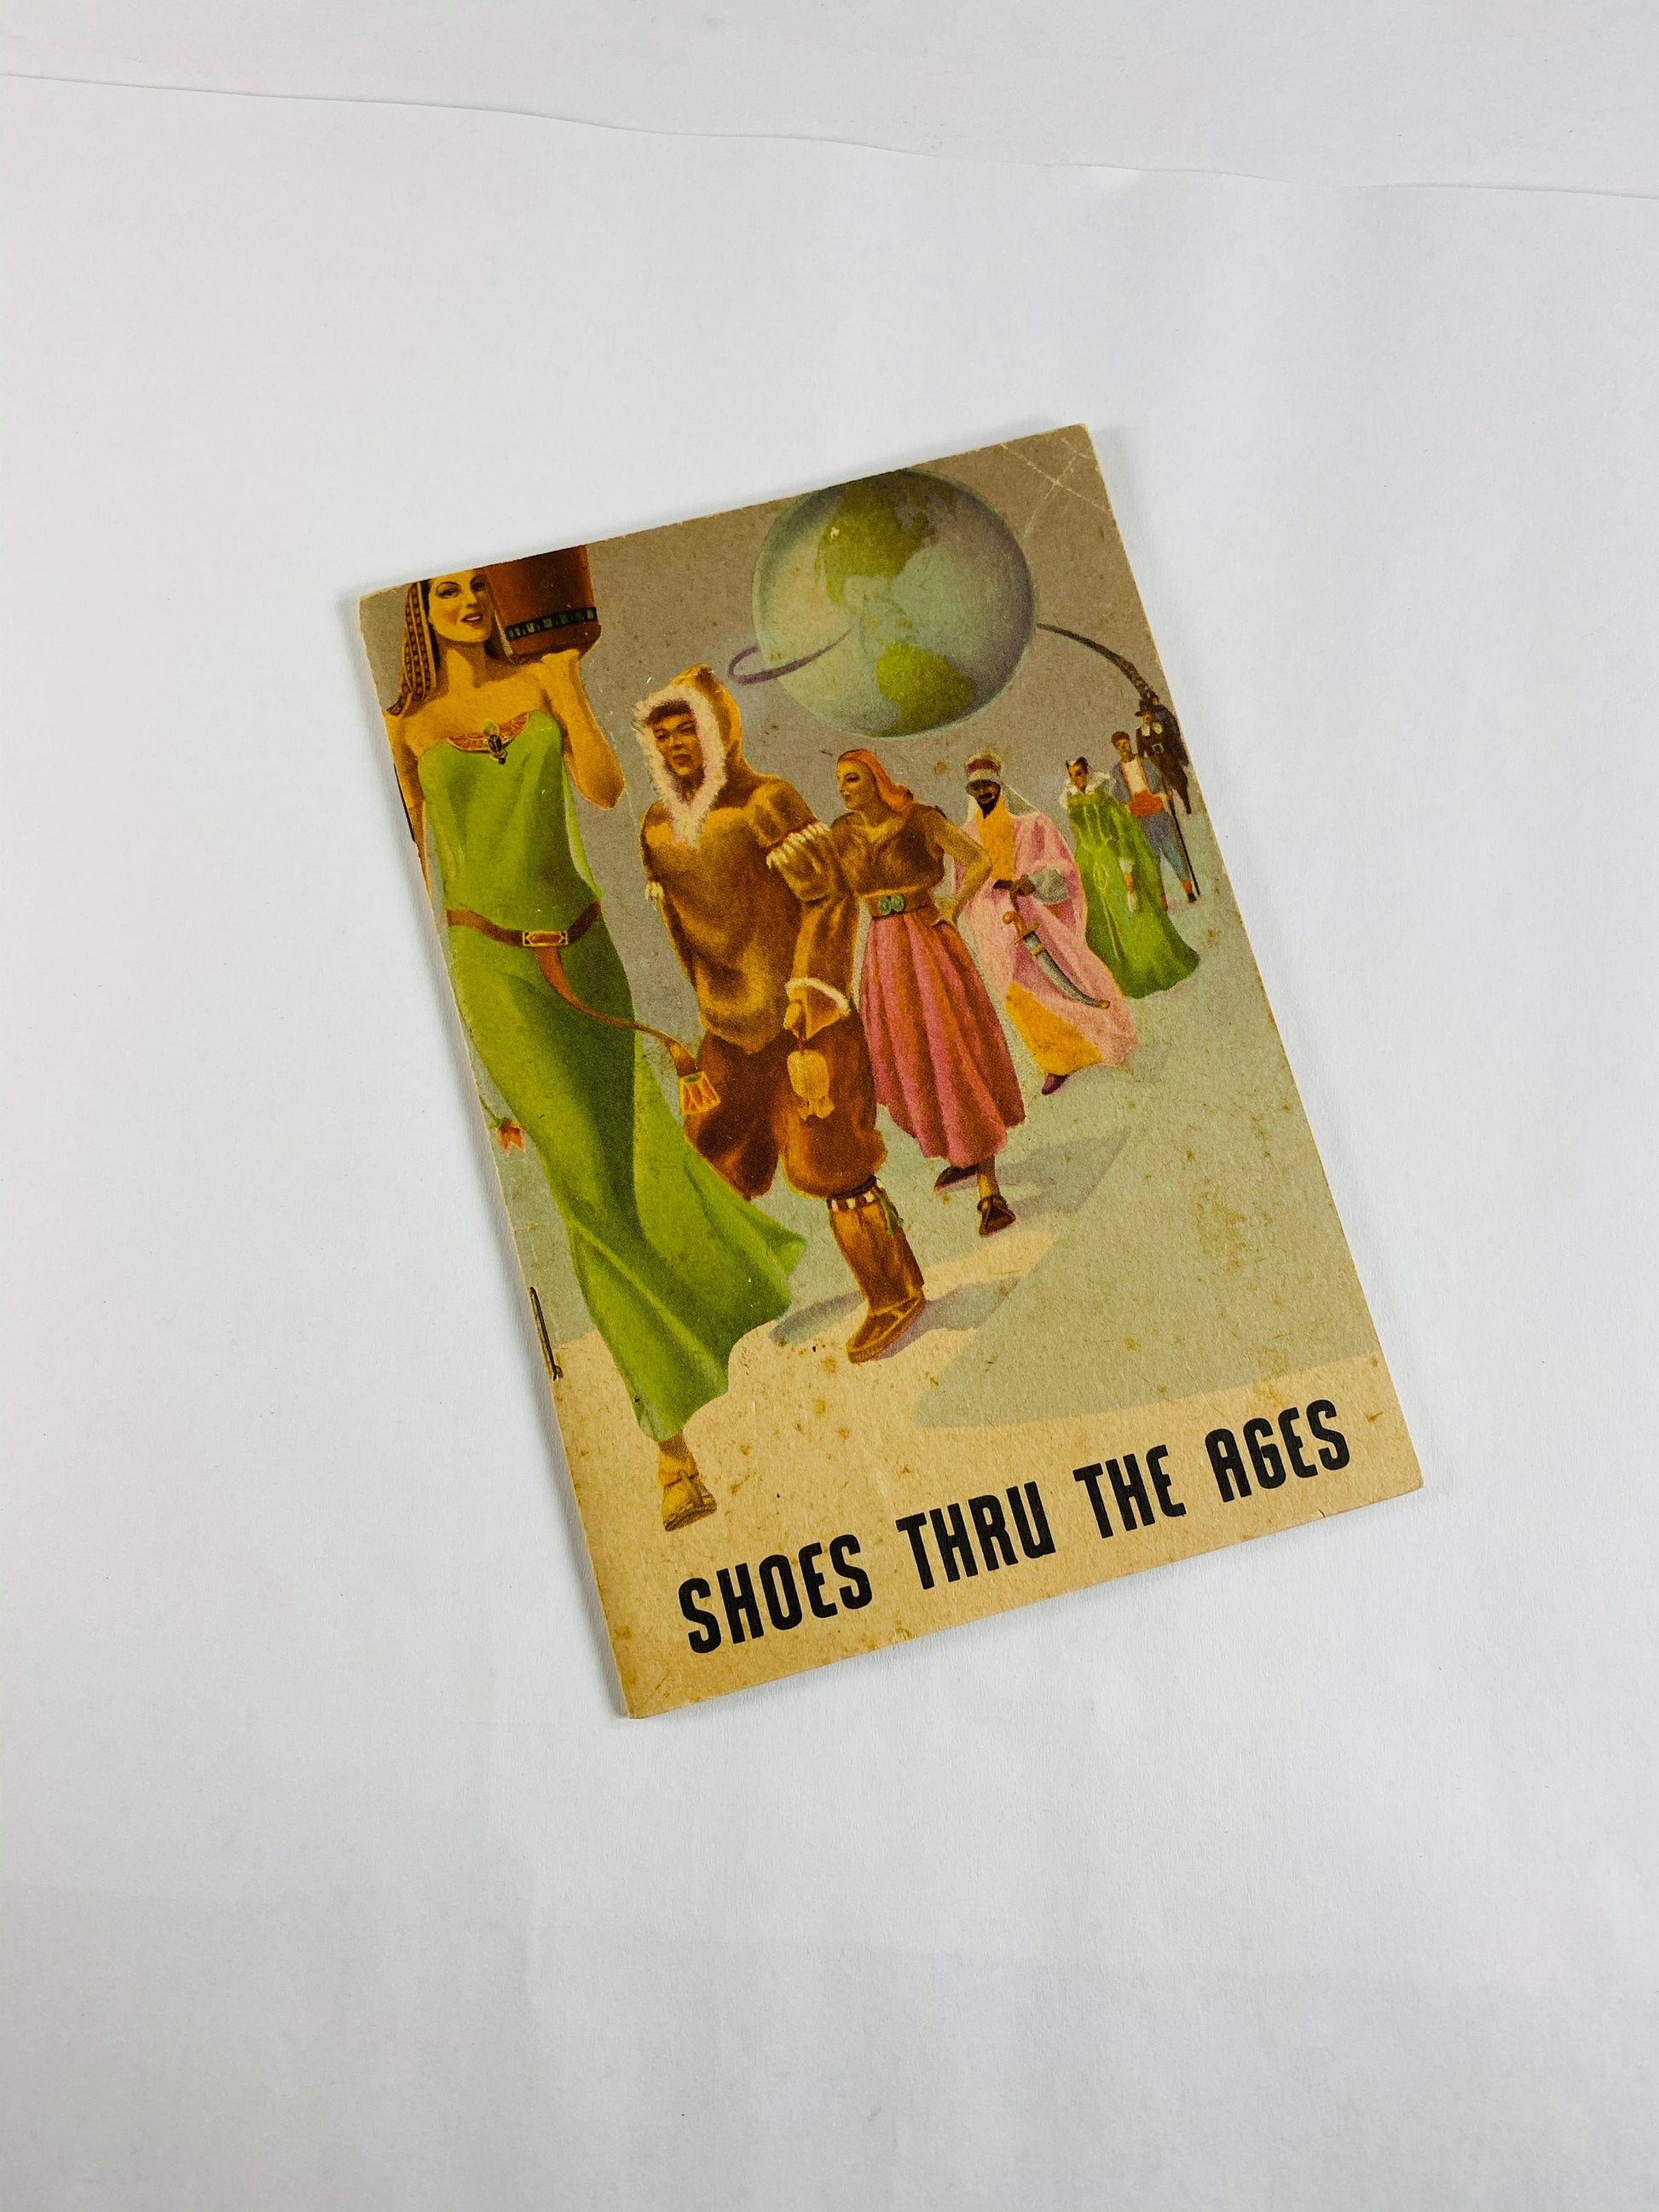 Shoes Thru the Ages Poll-Parrot and Farrar's Store vintage pamphlet circa 1950s-1960s. Fashion & history in the evolution of footwear